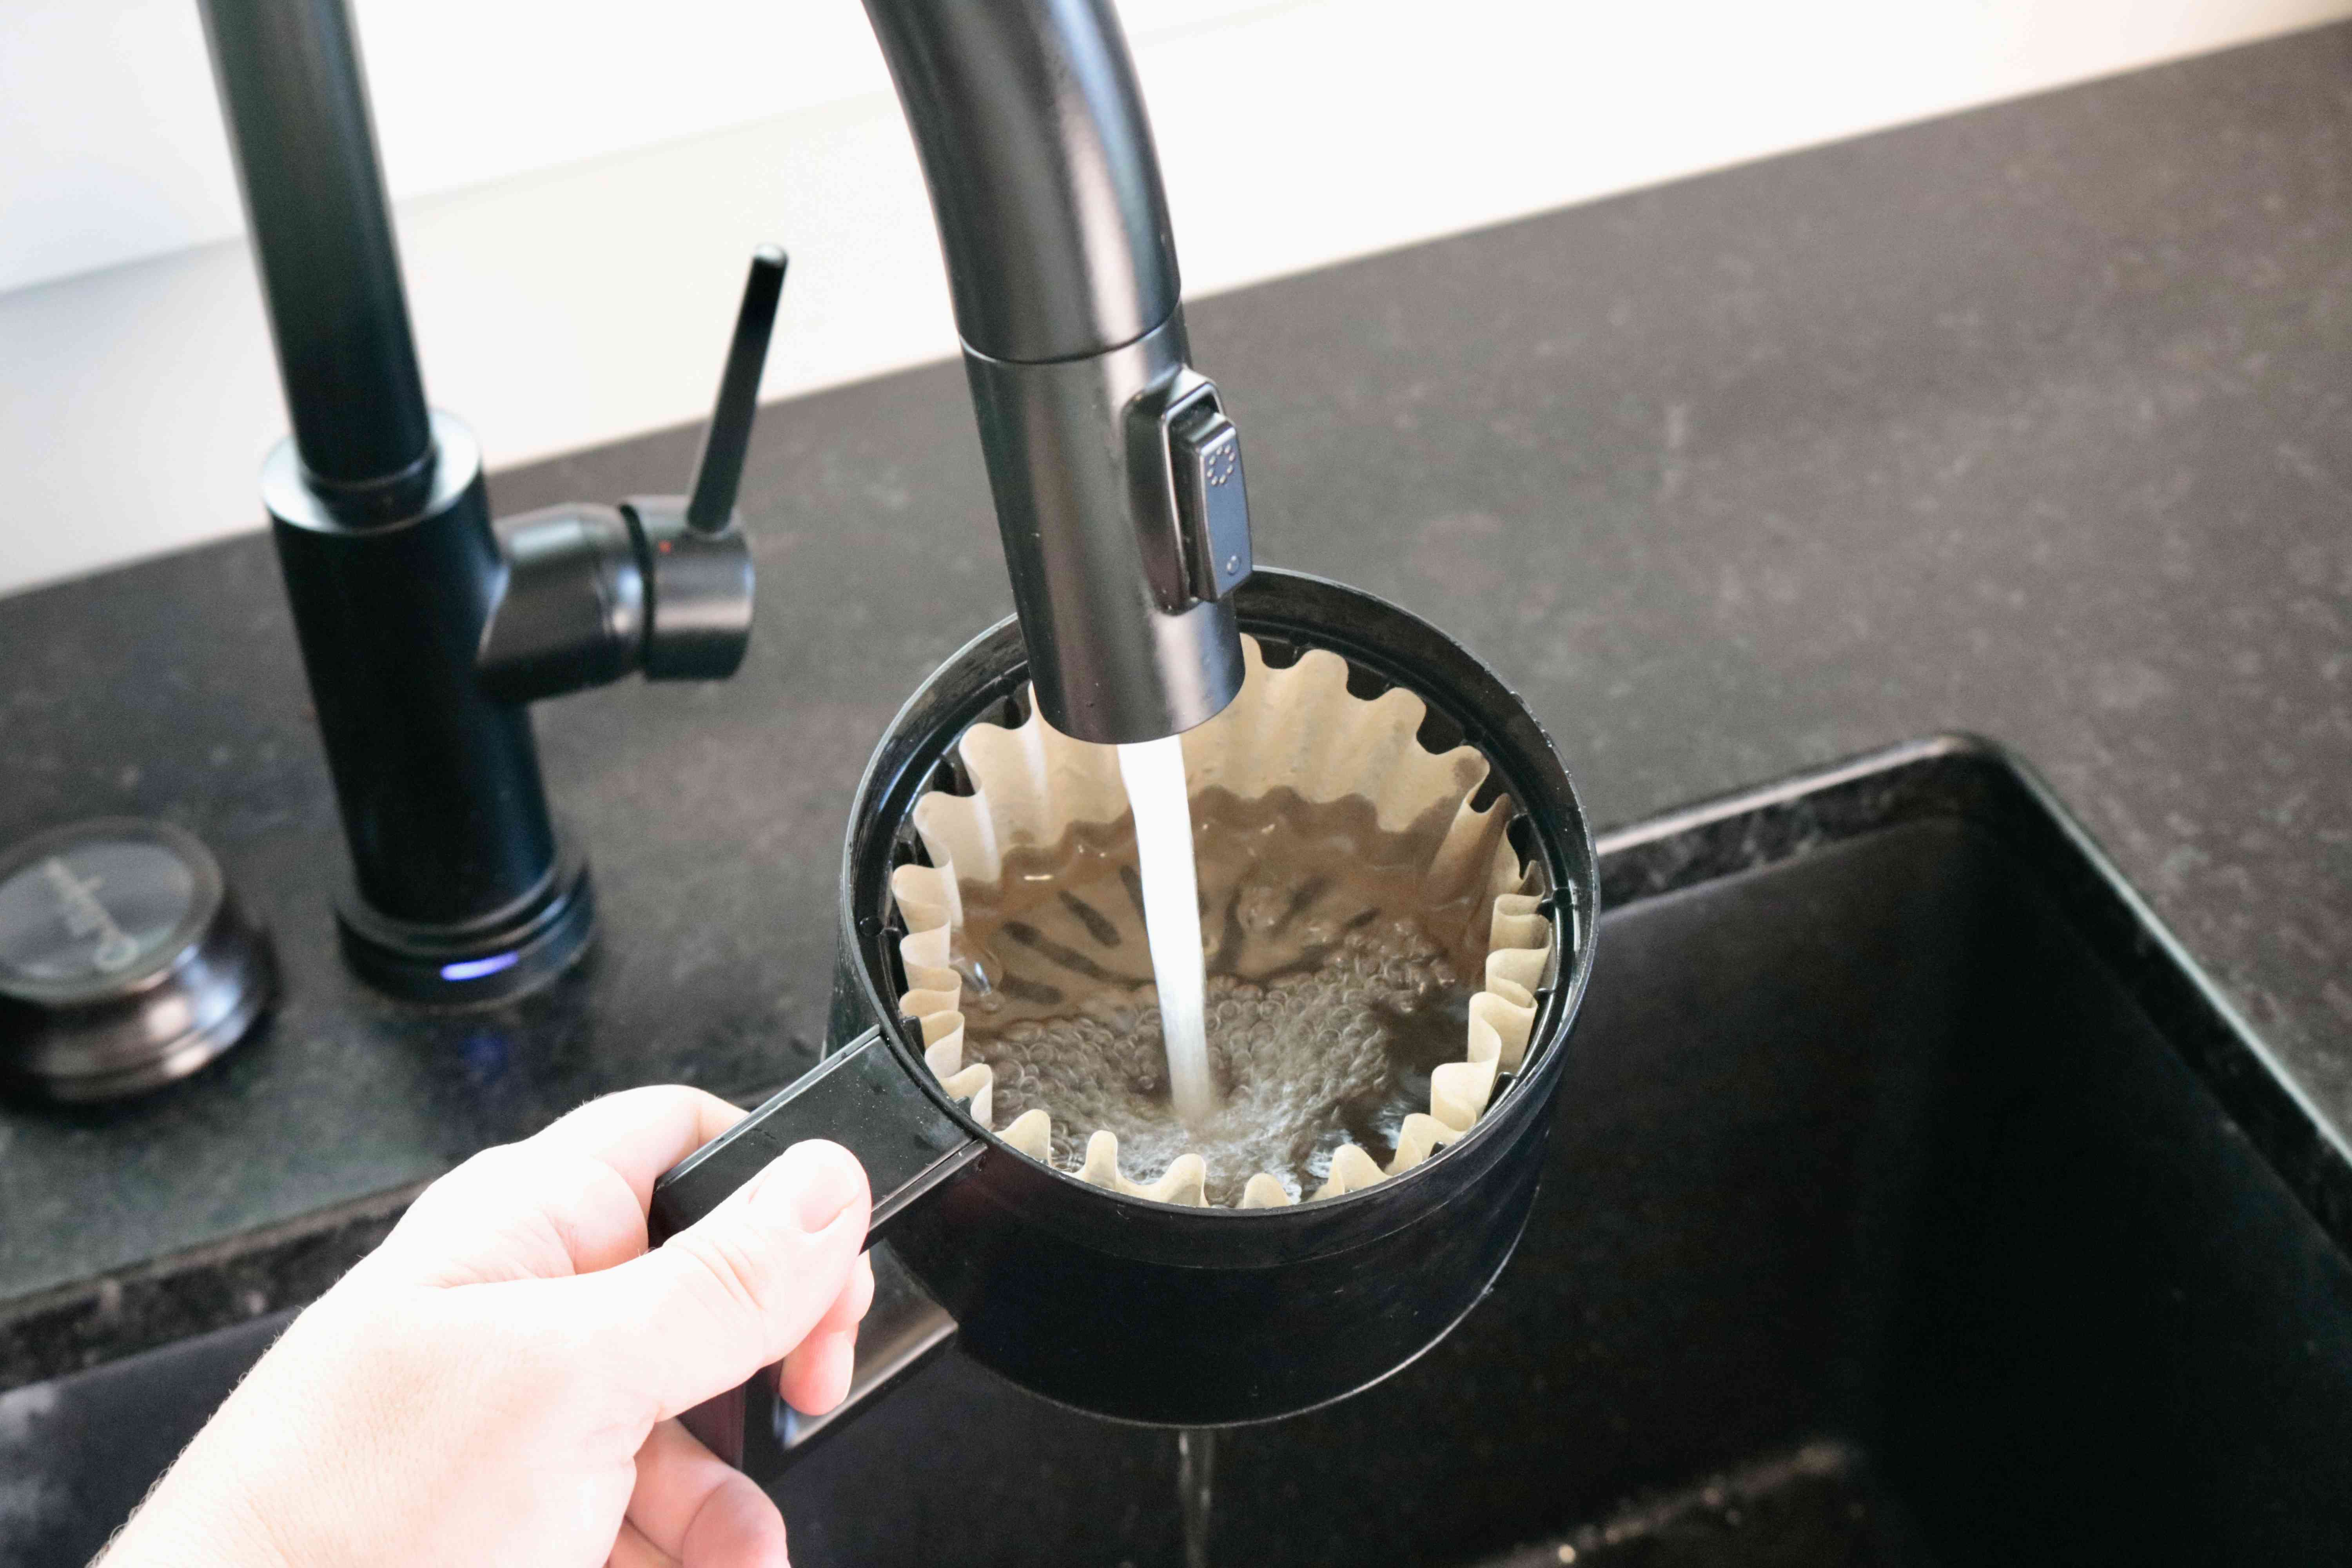 A hand rinsing a coffee placed in a brew basket under the faucet